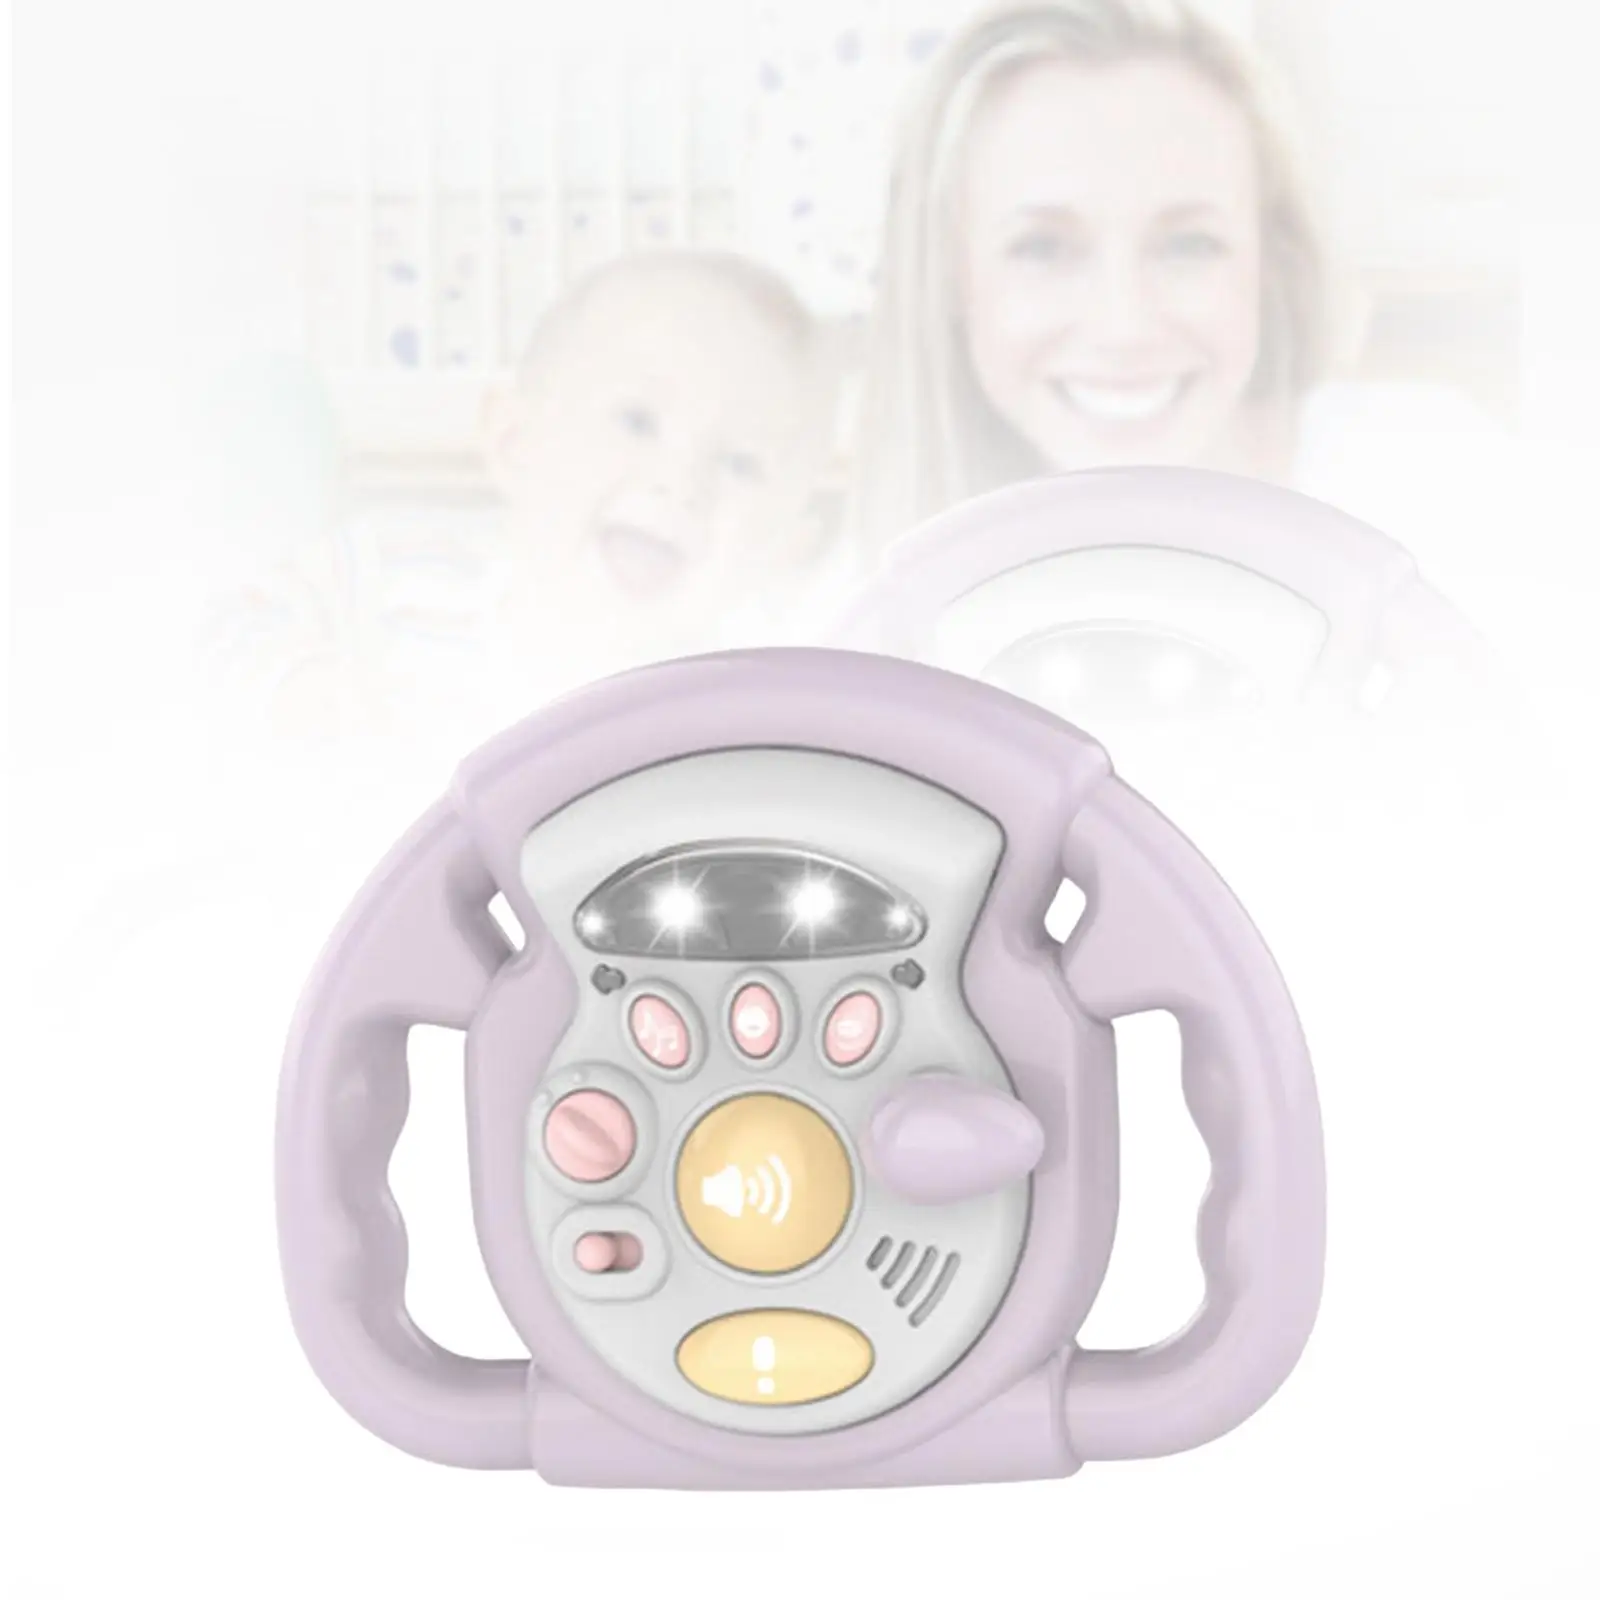 Multifunction Steering Wheel Toys Songs and Lights Driving Controller for Toddlers Children Girls Interactive Toy Education Toy